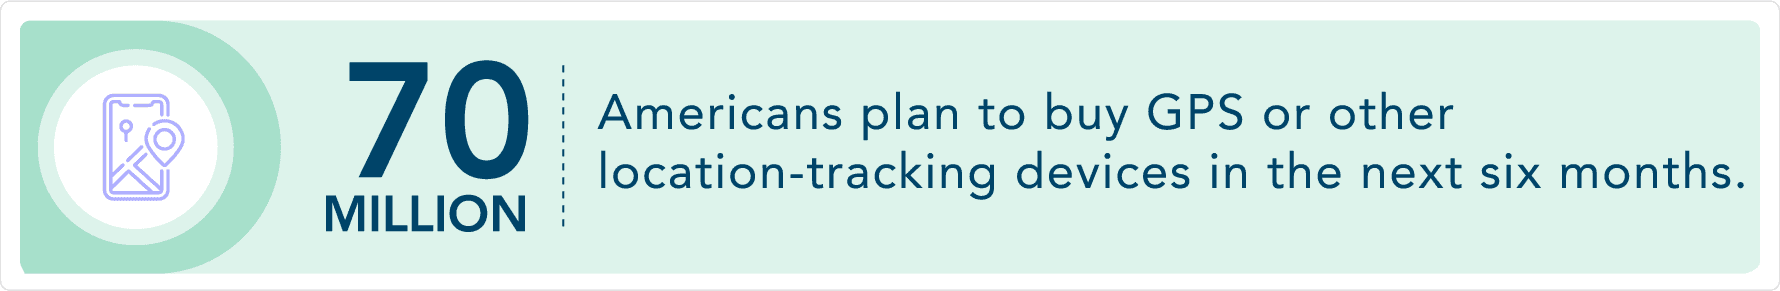 70 million Americans plan to buy GPS or other tracking devices